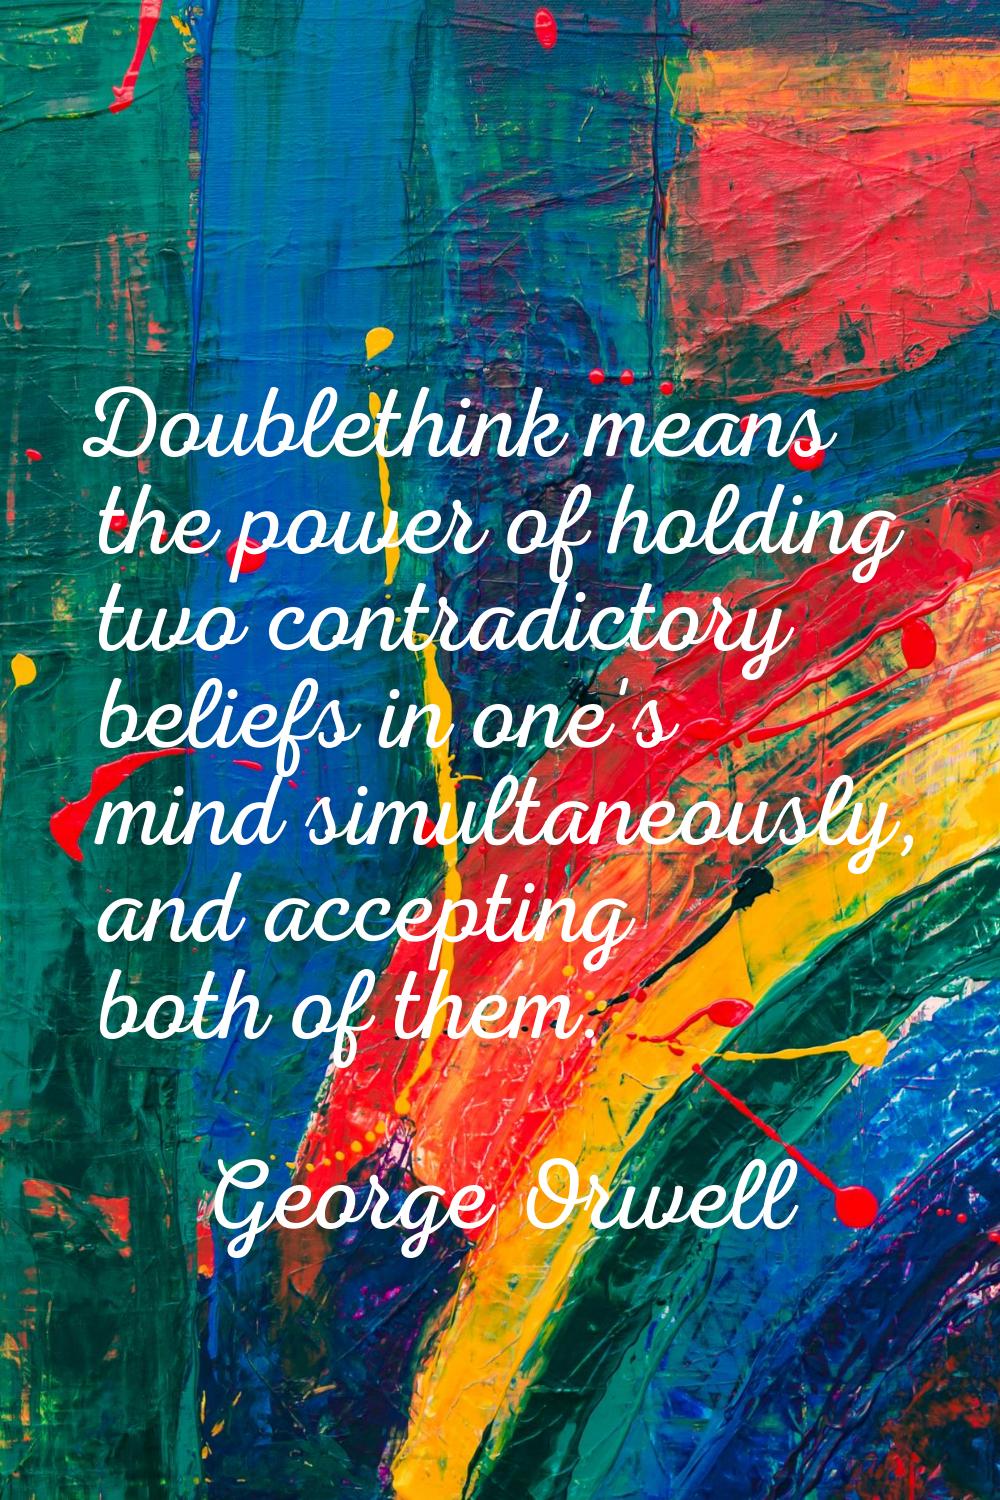 Doublethink means the power of holding two contradictory beliefs in one's mind simultaneously, and 